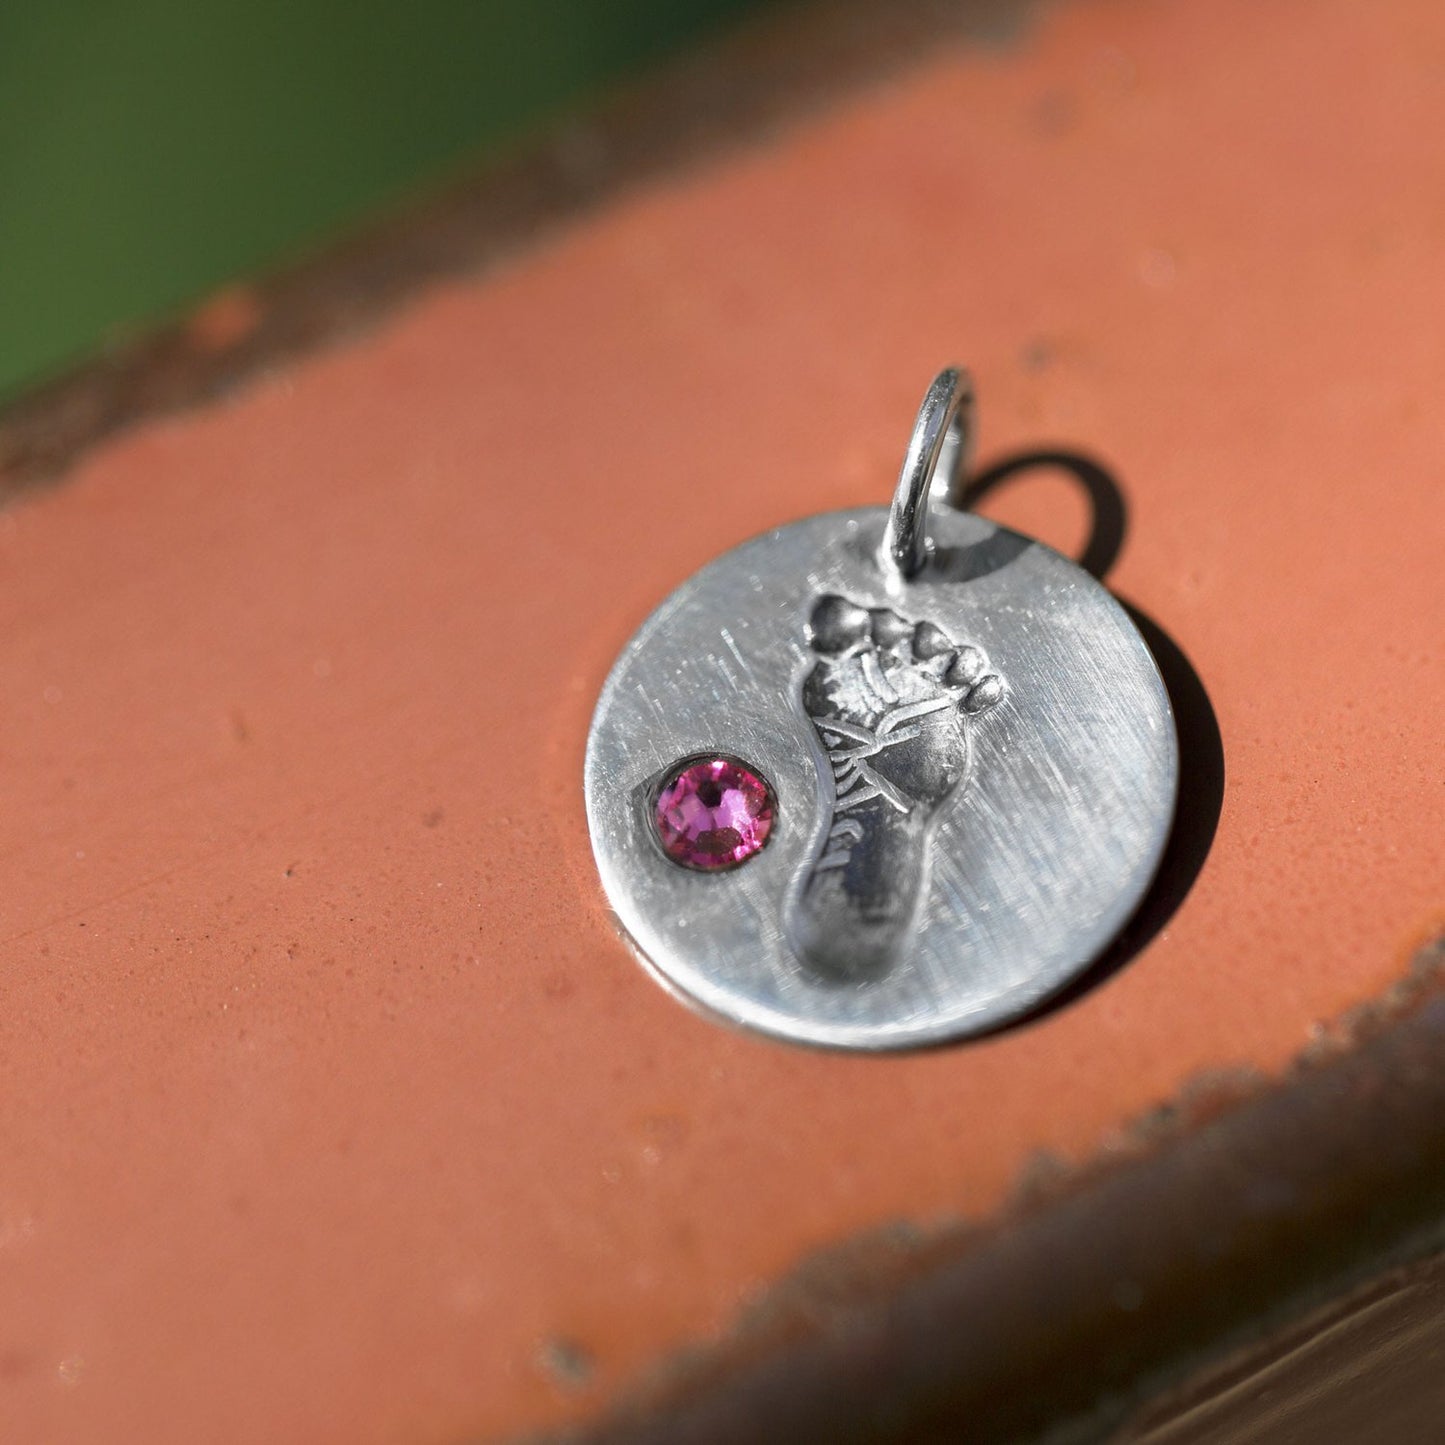 Footprint Charm with Pink Crystal